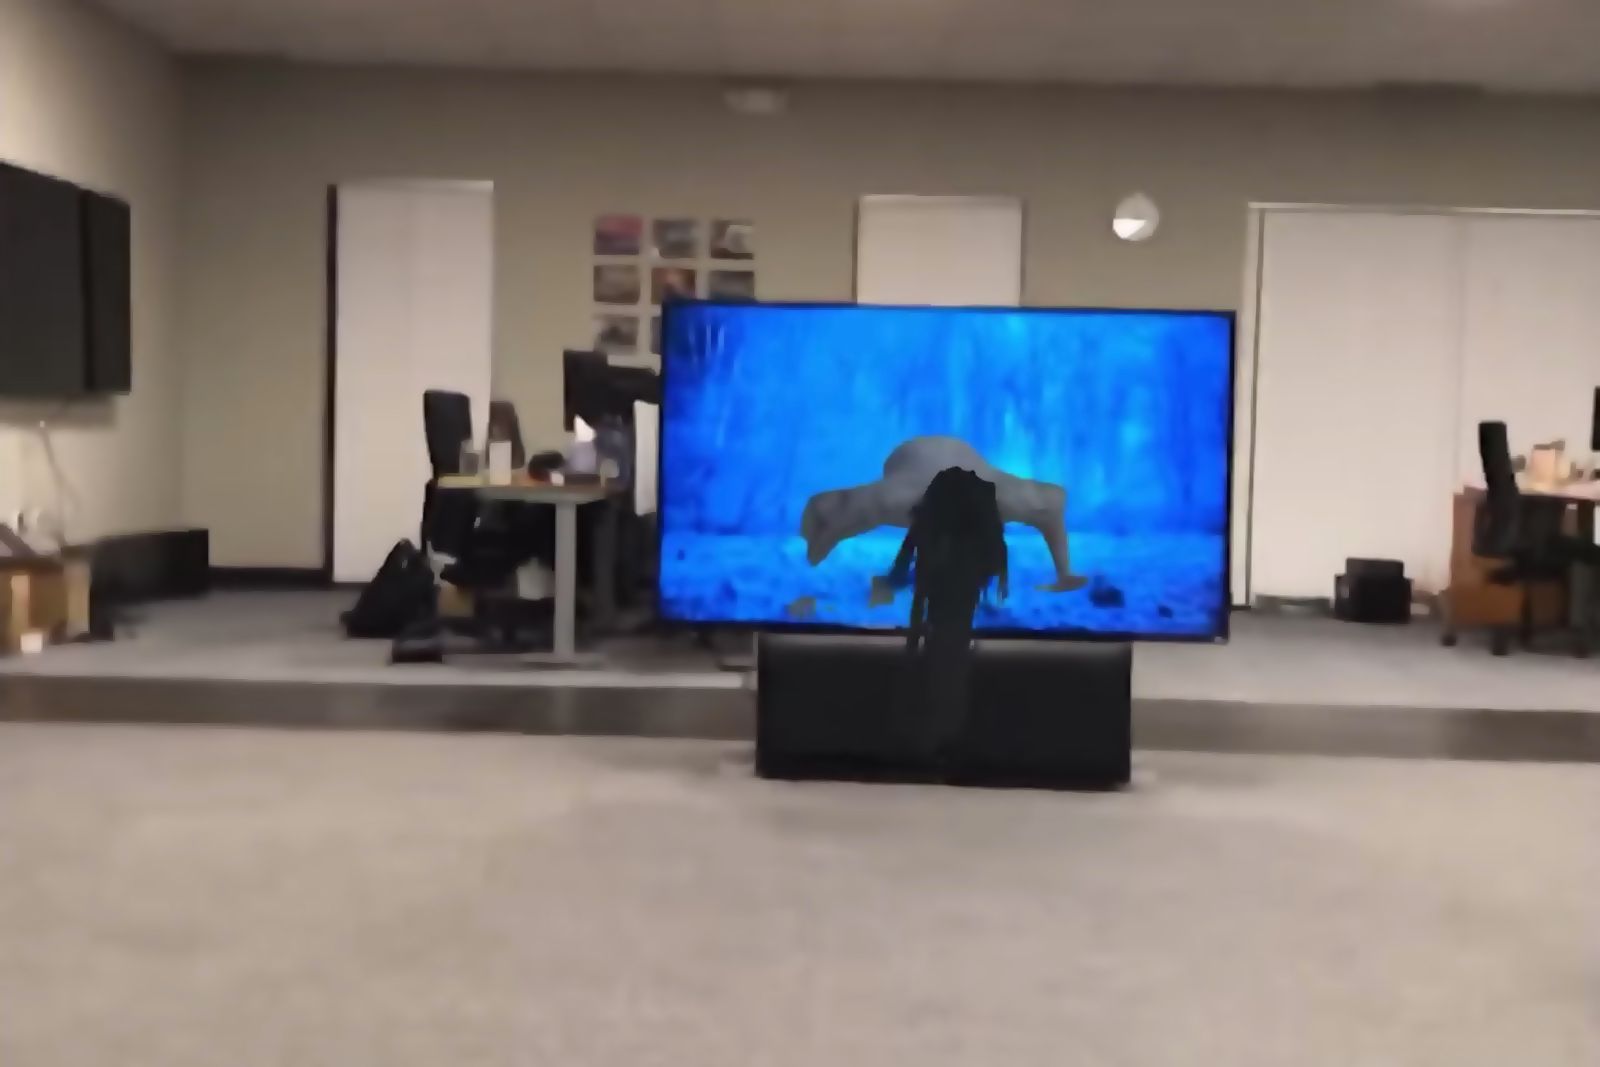 Watch that creepy girl from The Ring crawl out from a TV in AR image 1